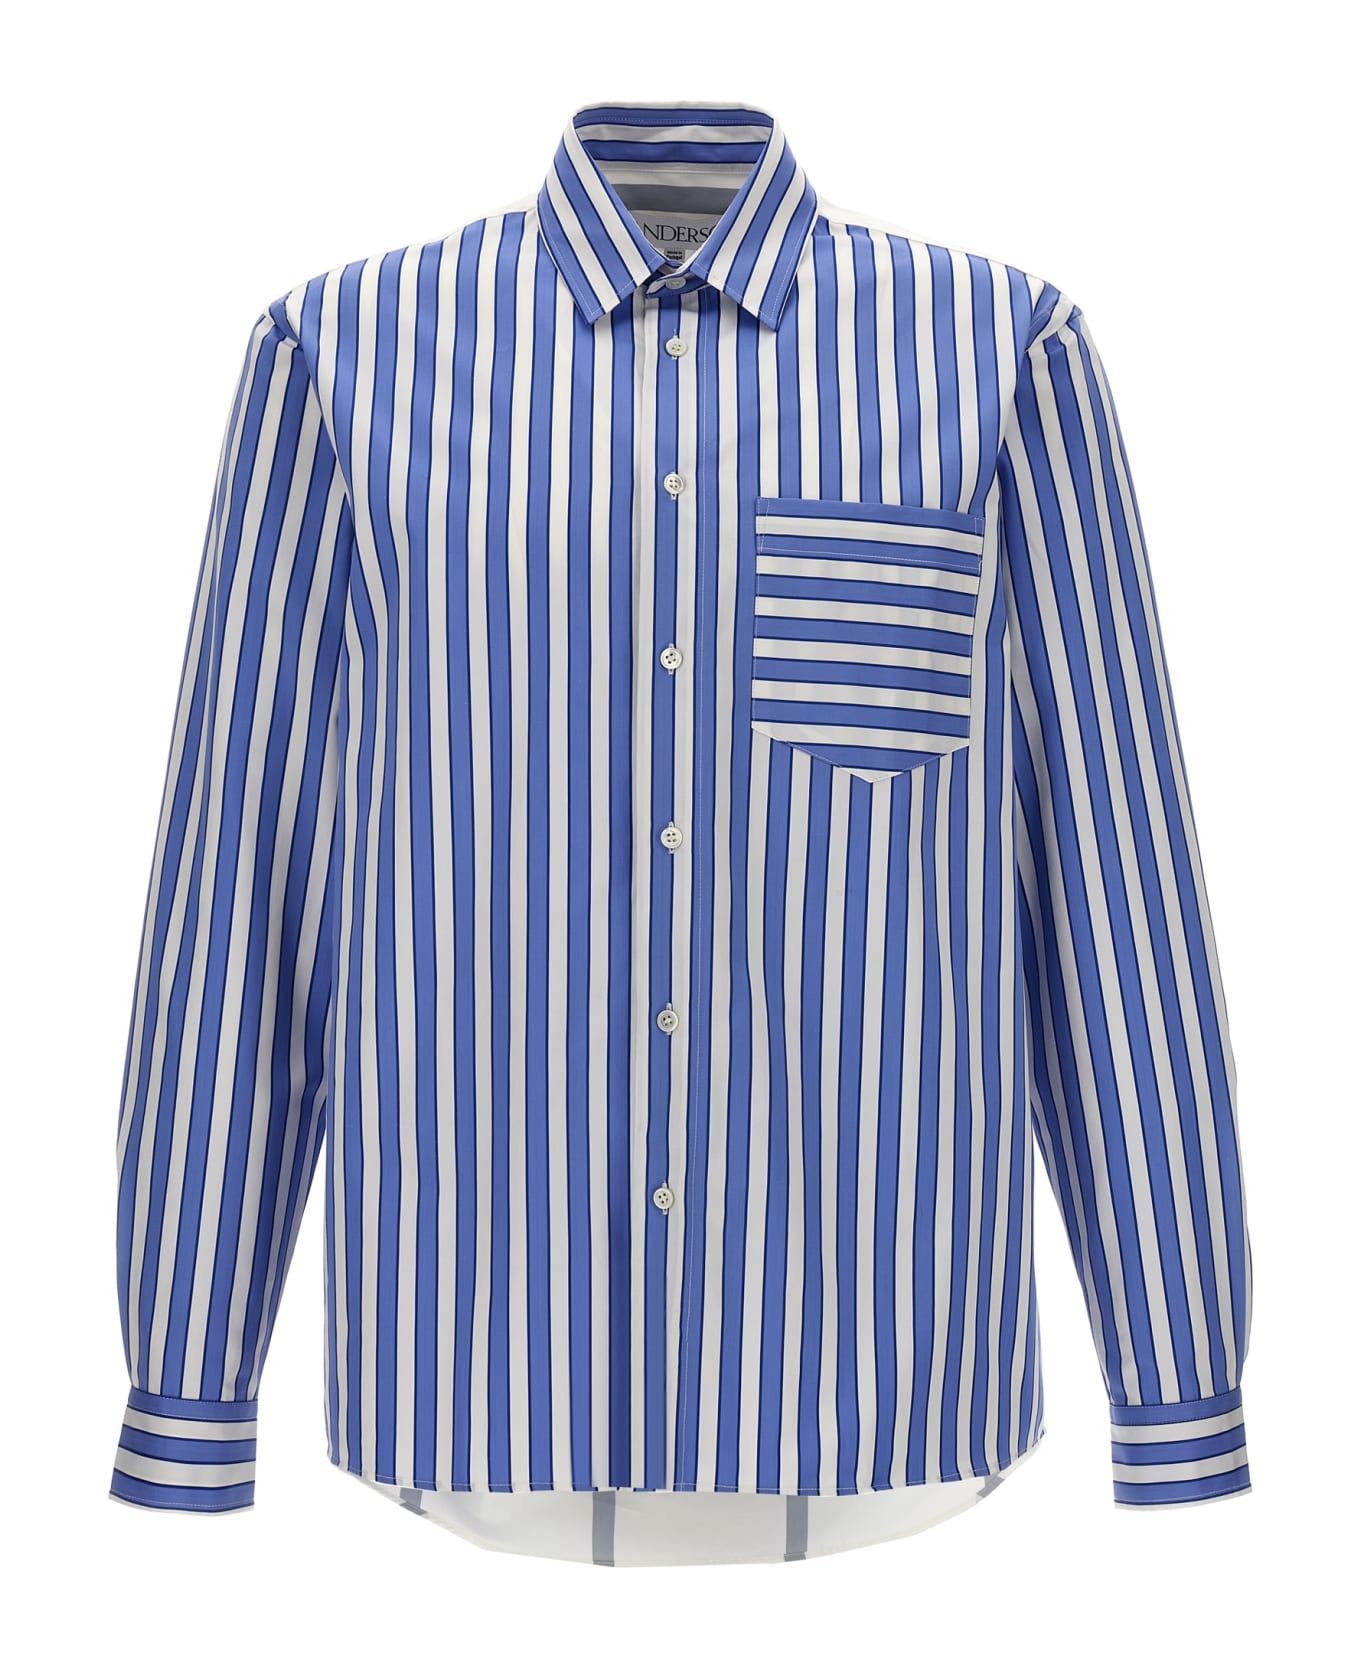 J.W. Anderson Patchwork Shirt - NAVY